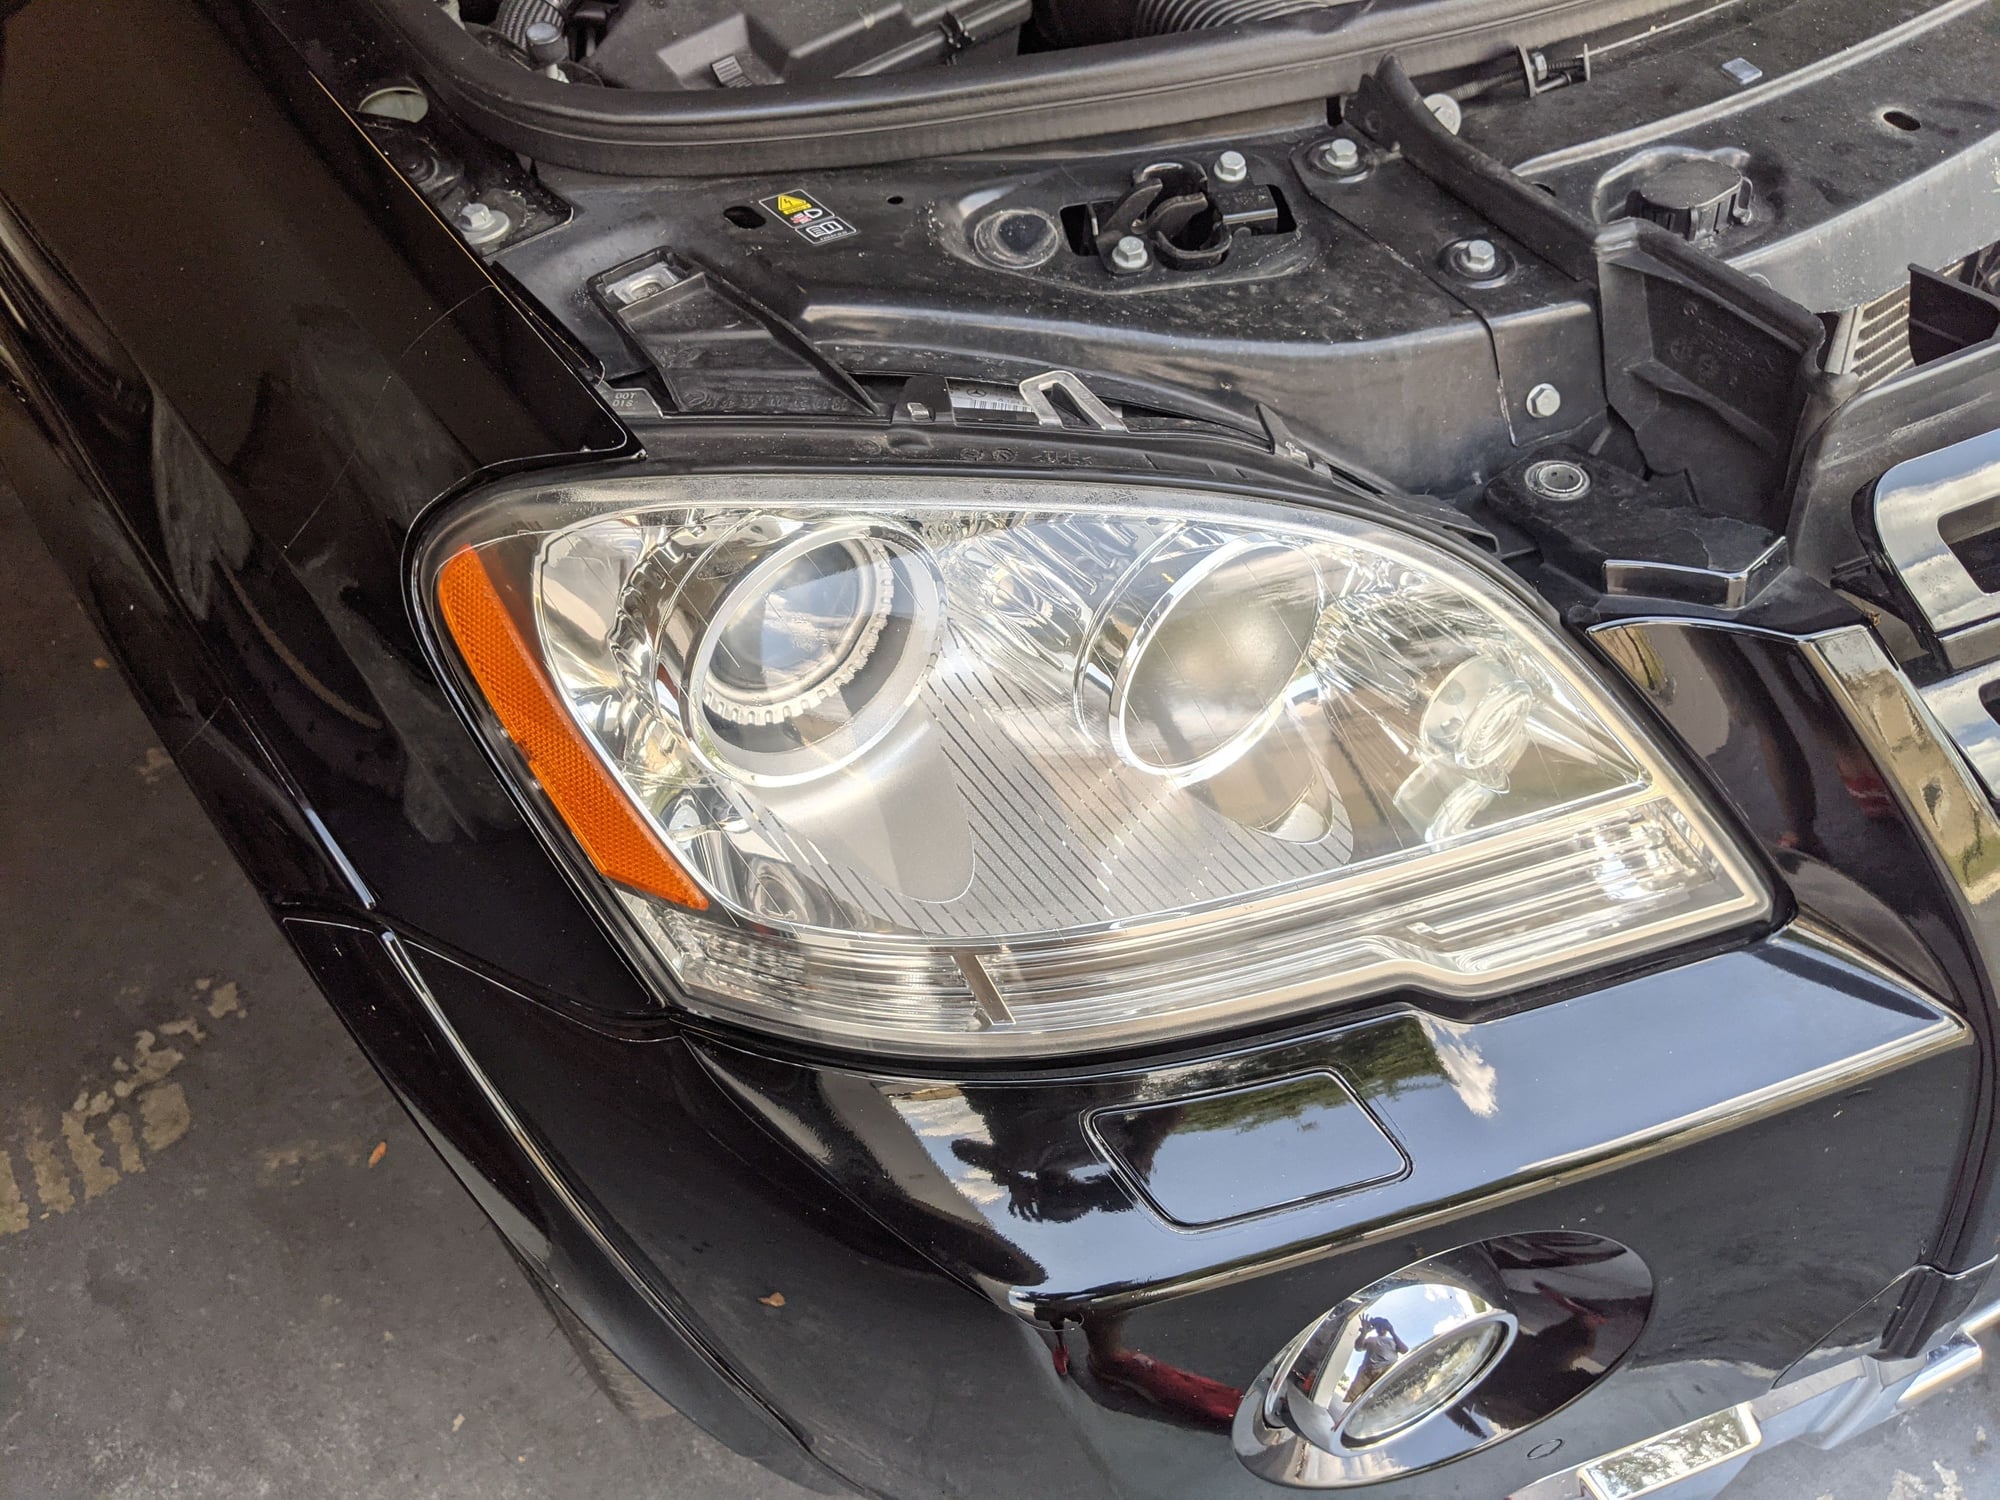 Lights - W164 Bi-Xenon headlights; complete set - Fantastic condition. - Used - 2009 to 2011 Mercedes-Benz ML63 AMG - Fort Myers, FL 33913, United States